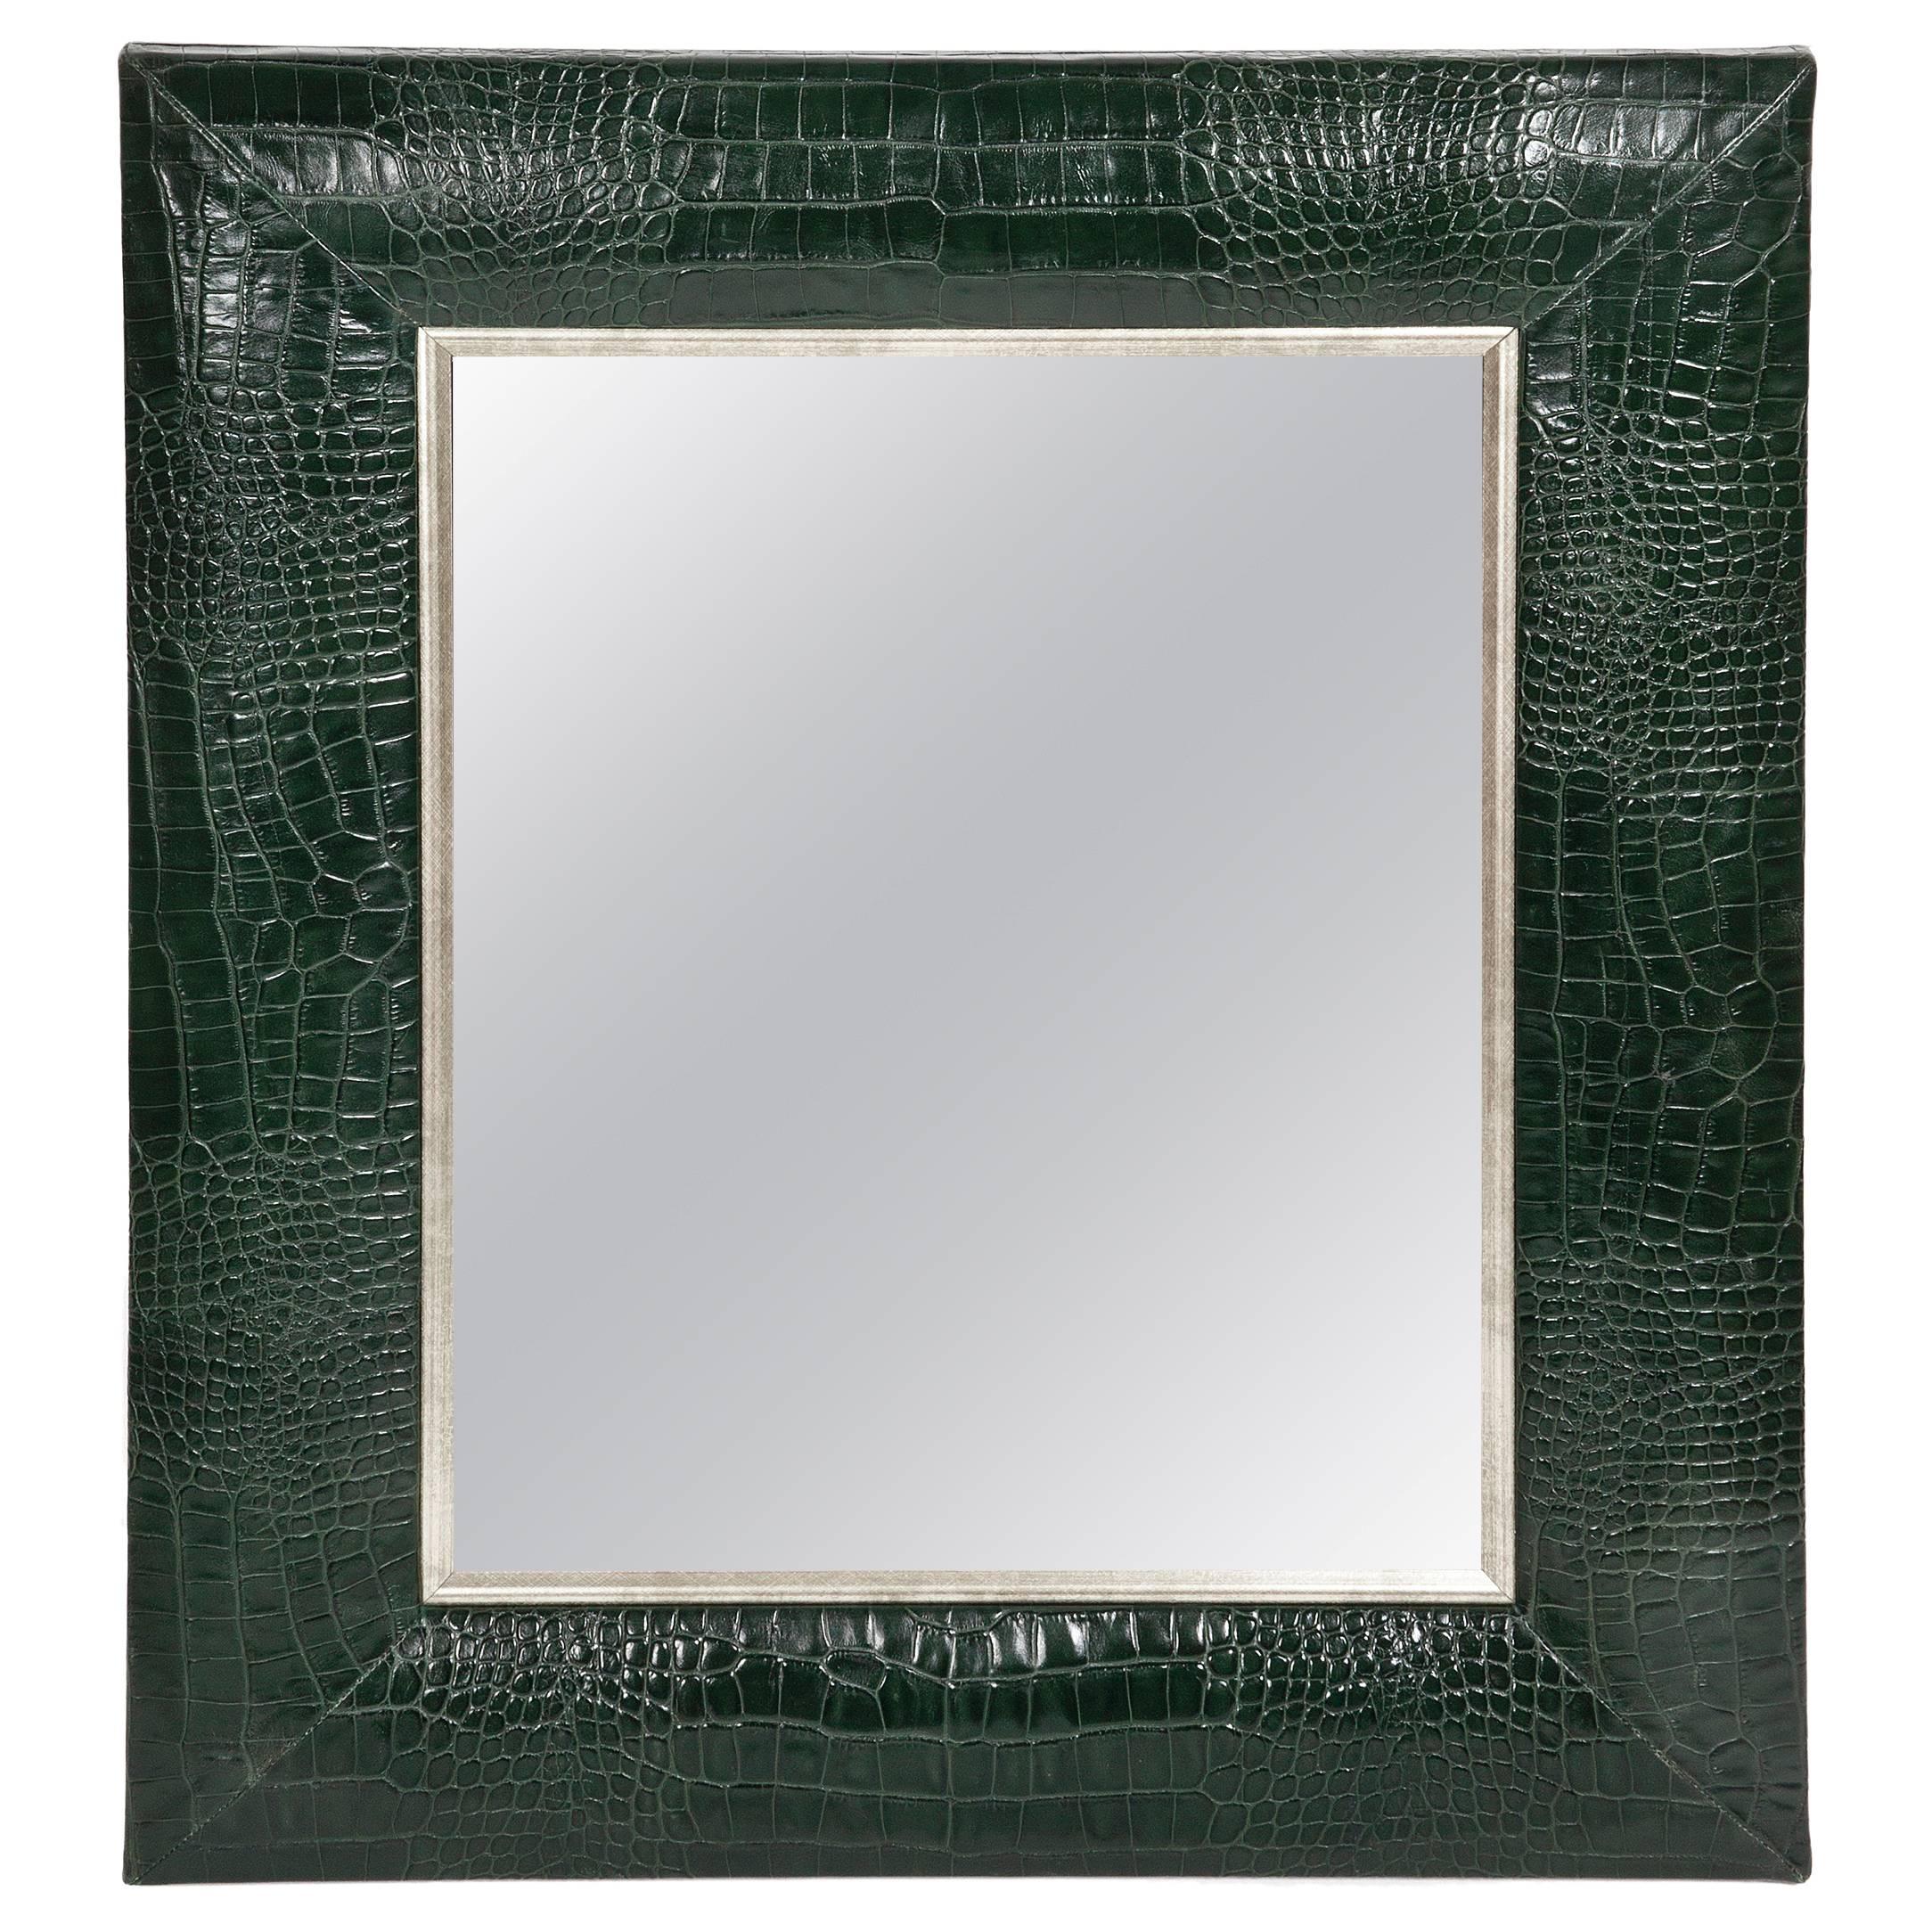 Classic Hunter Green Croc Leather Framed Mirror with Silver Details